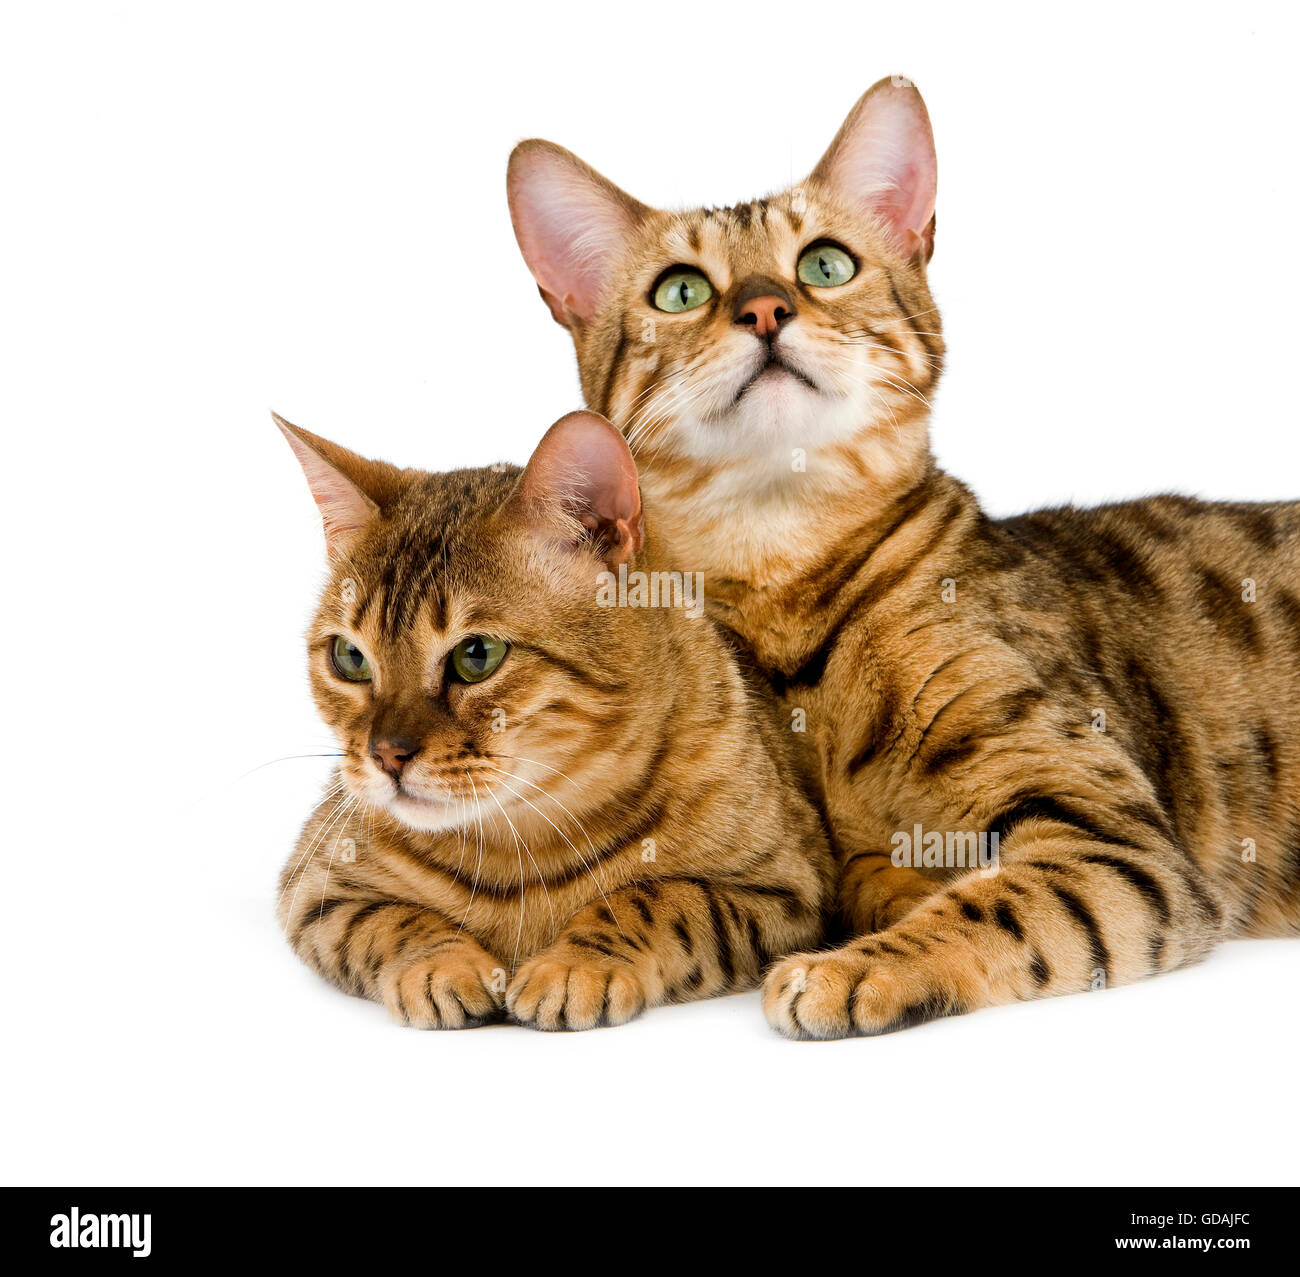 BROWN SPOTTED TABBY BENGAL DOMESTIC CAT Stock Photo